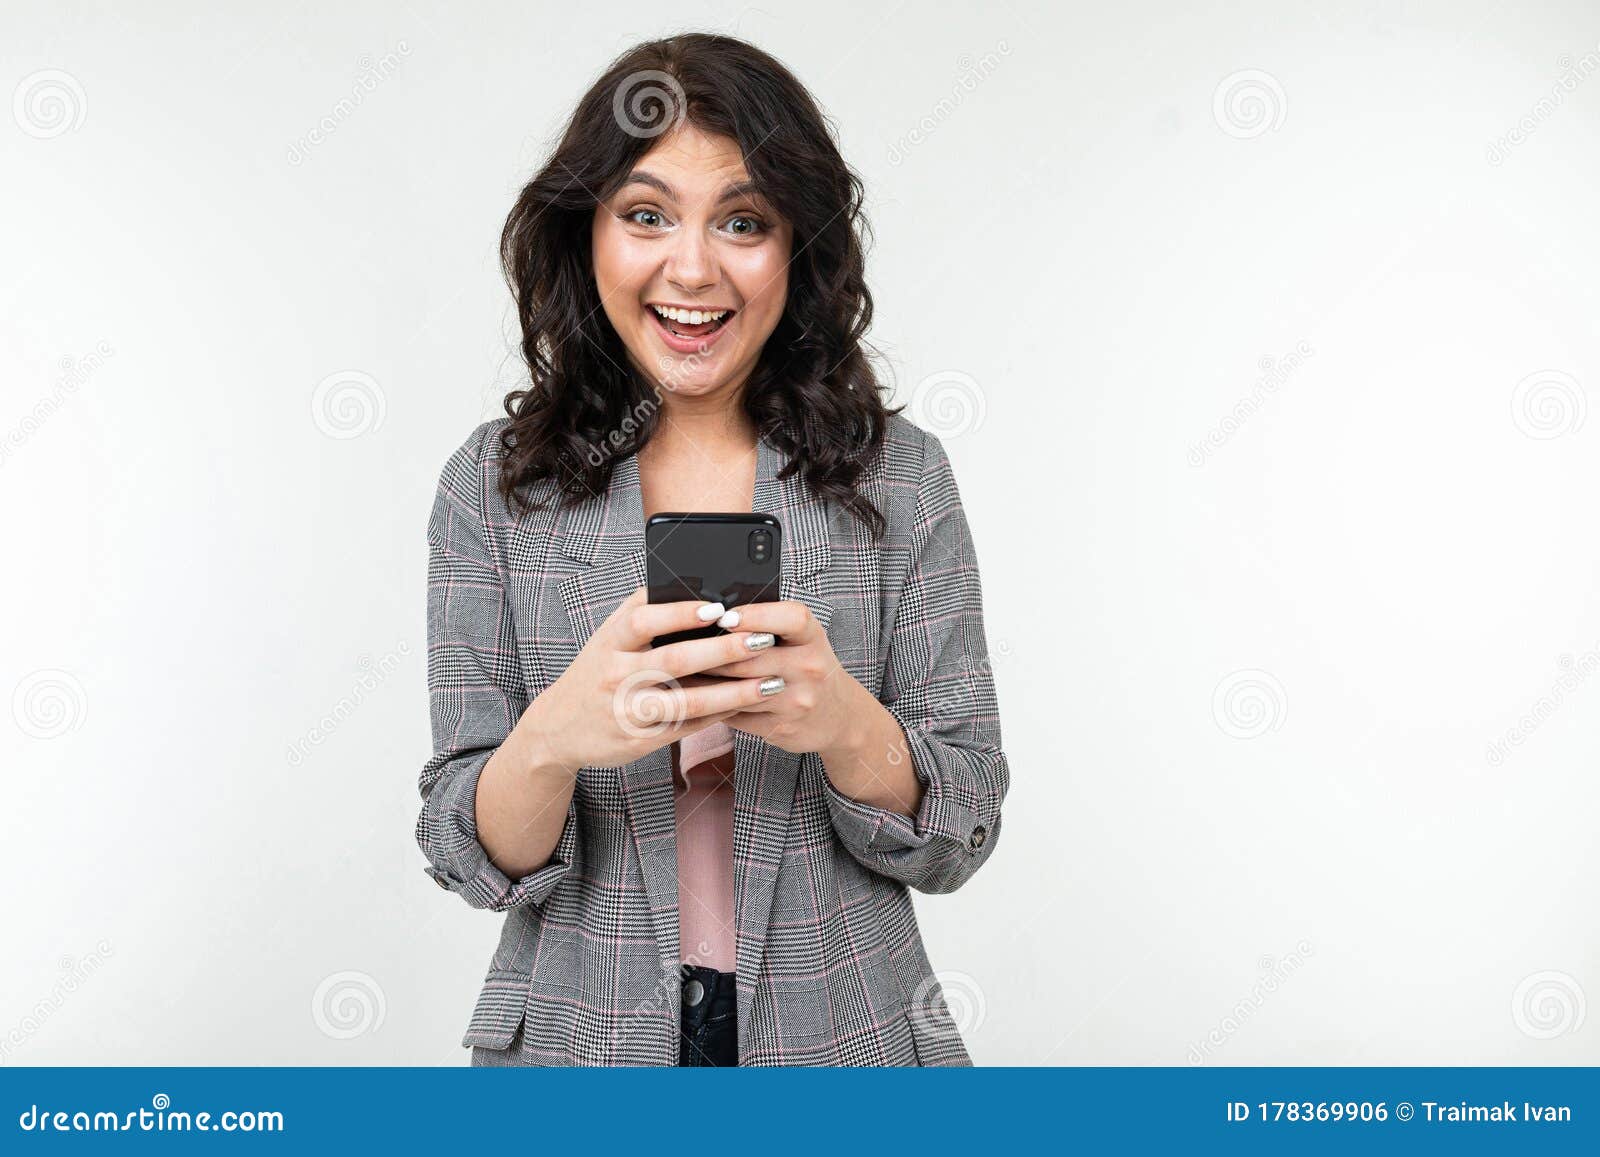 brunette girl smilingly looks into the smartphone display on a white studio background